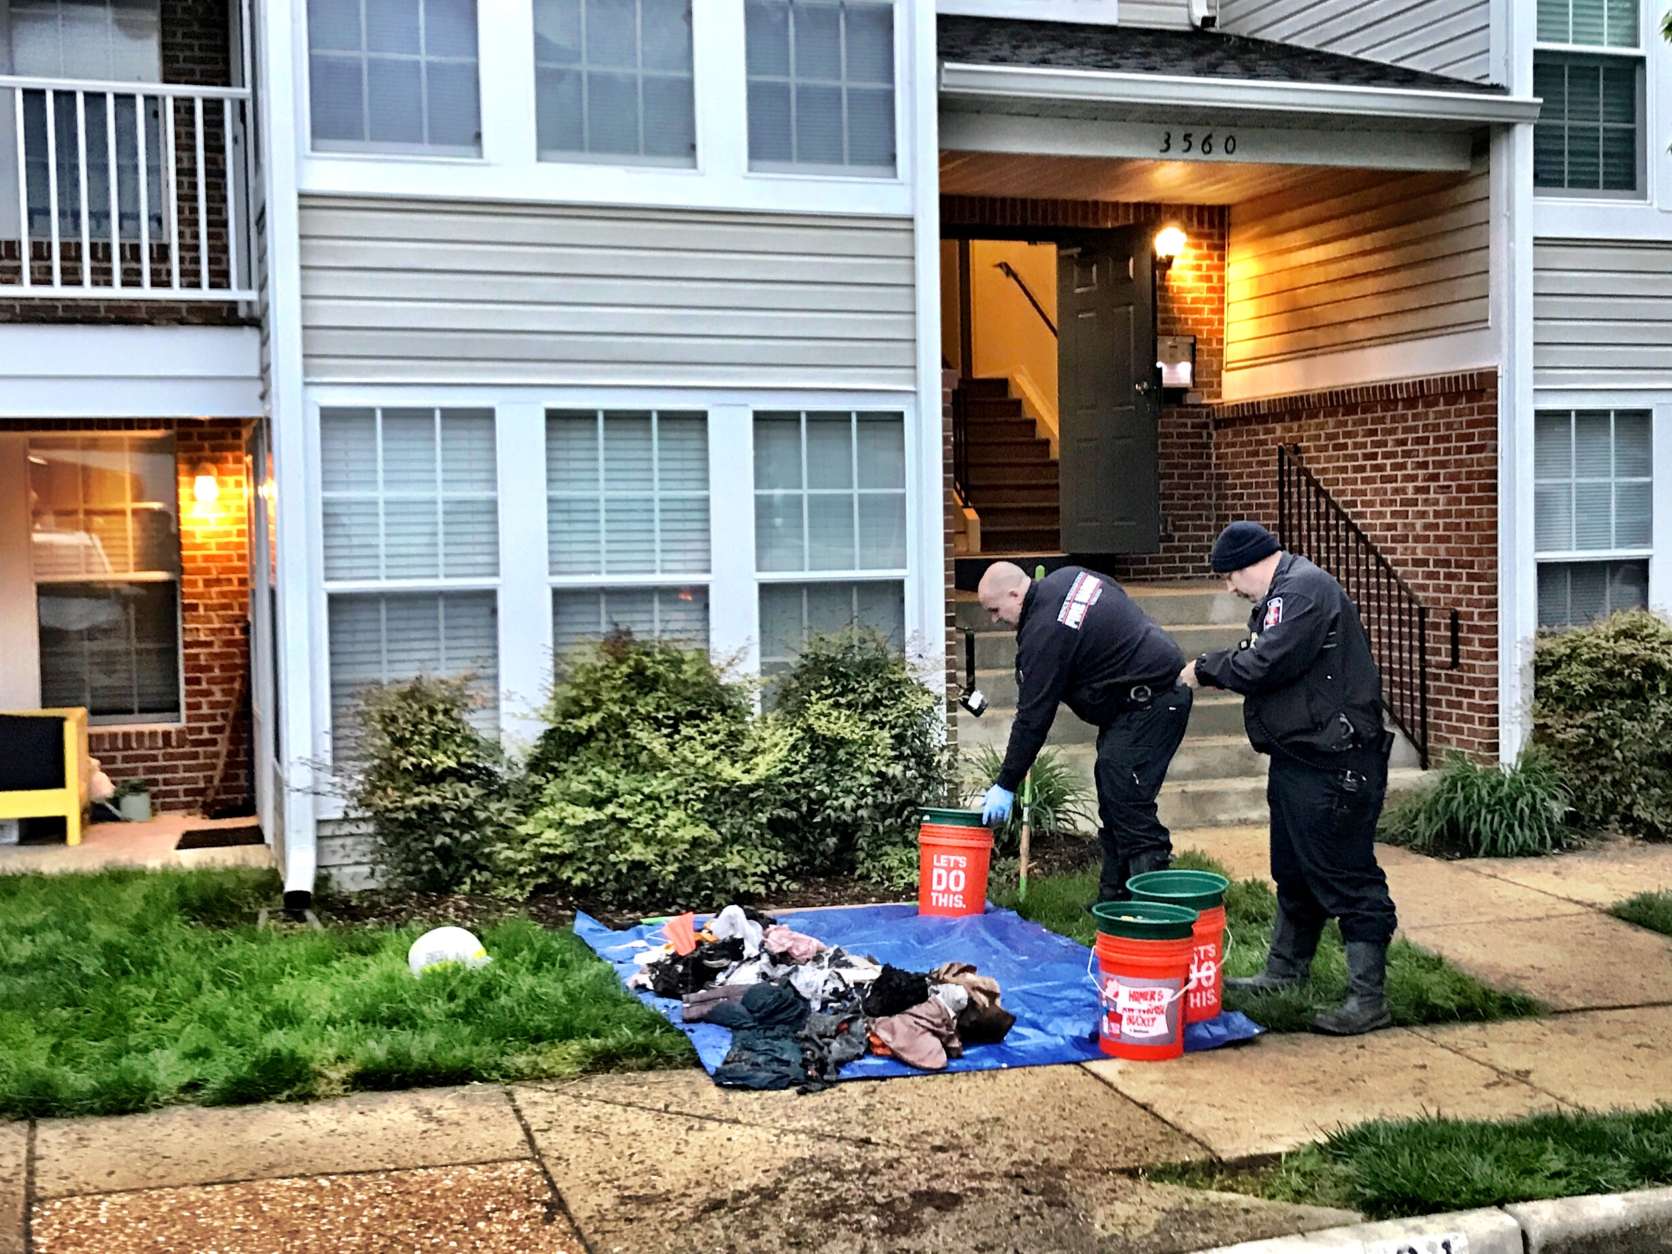 Homicide and fire investigators are trying to determine why a man was found unconscious when they arrived to fight an overnight apartment fire in Prince William County. (WTOP/Neal Augenstein)